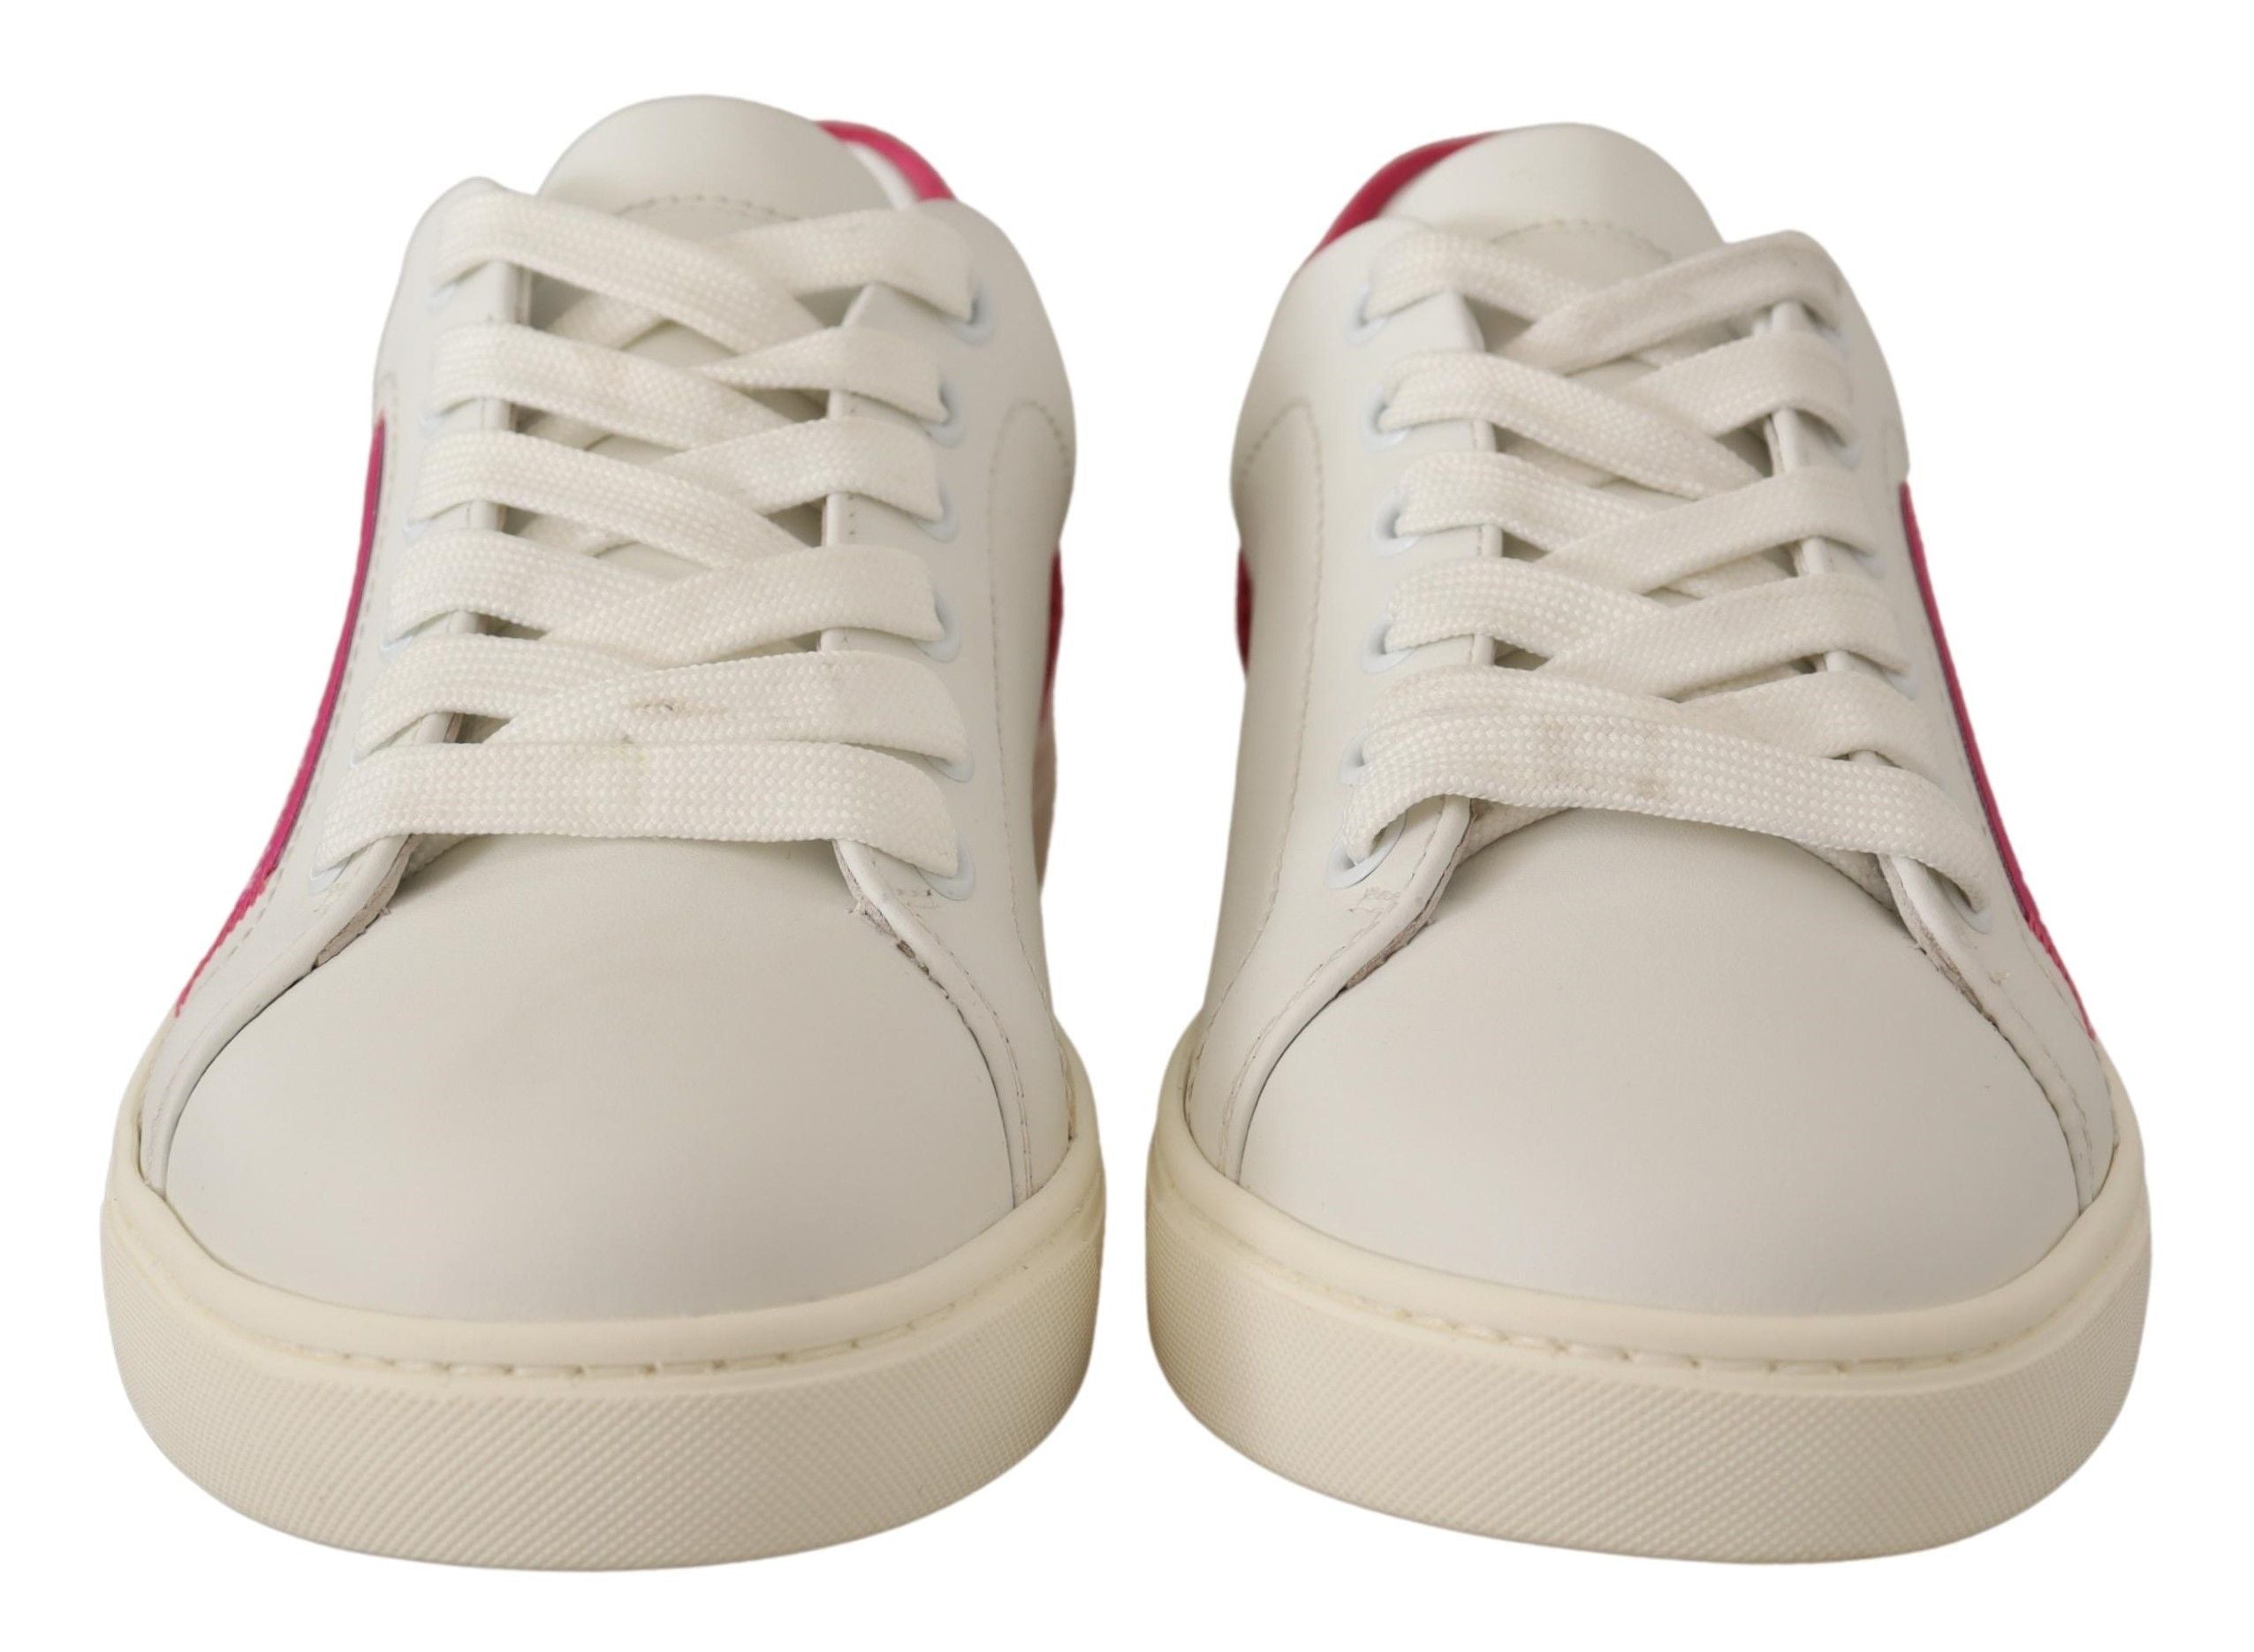 White Pink Leather Low Top Sneakers Womens Shoes